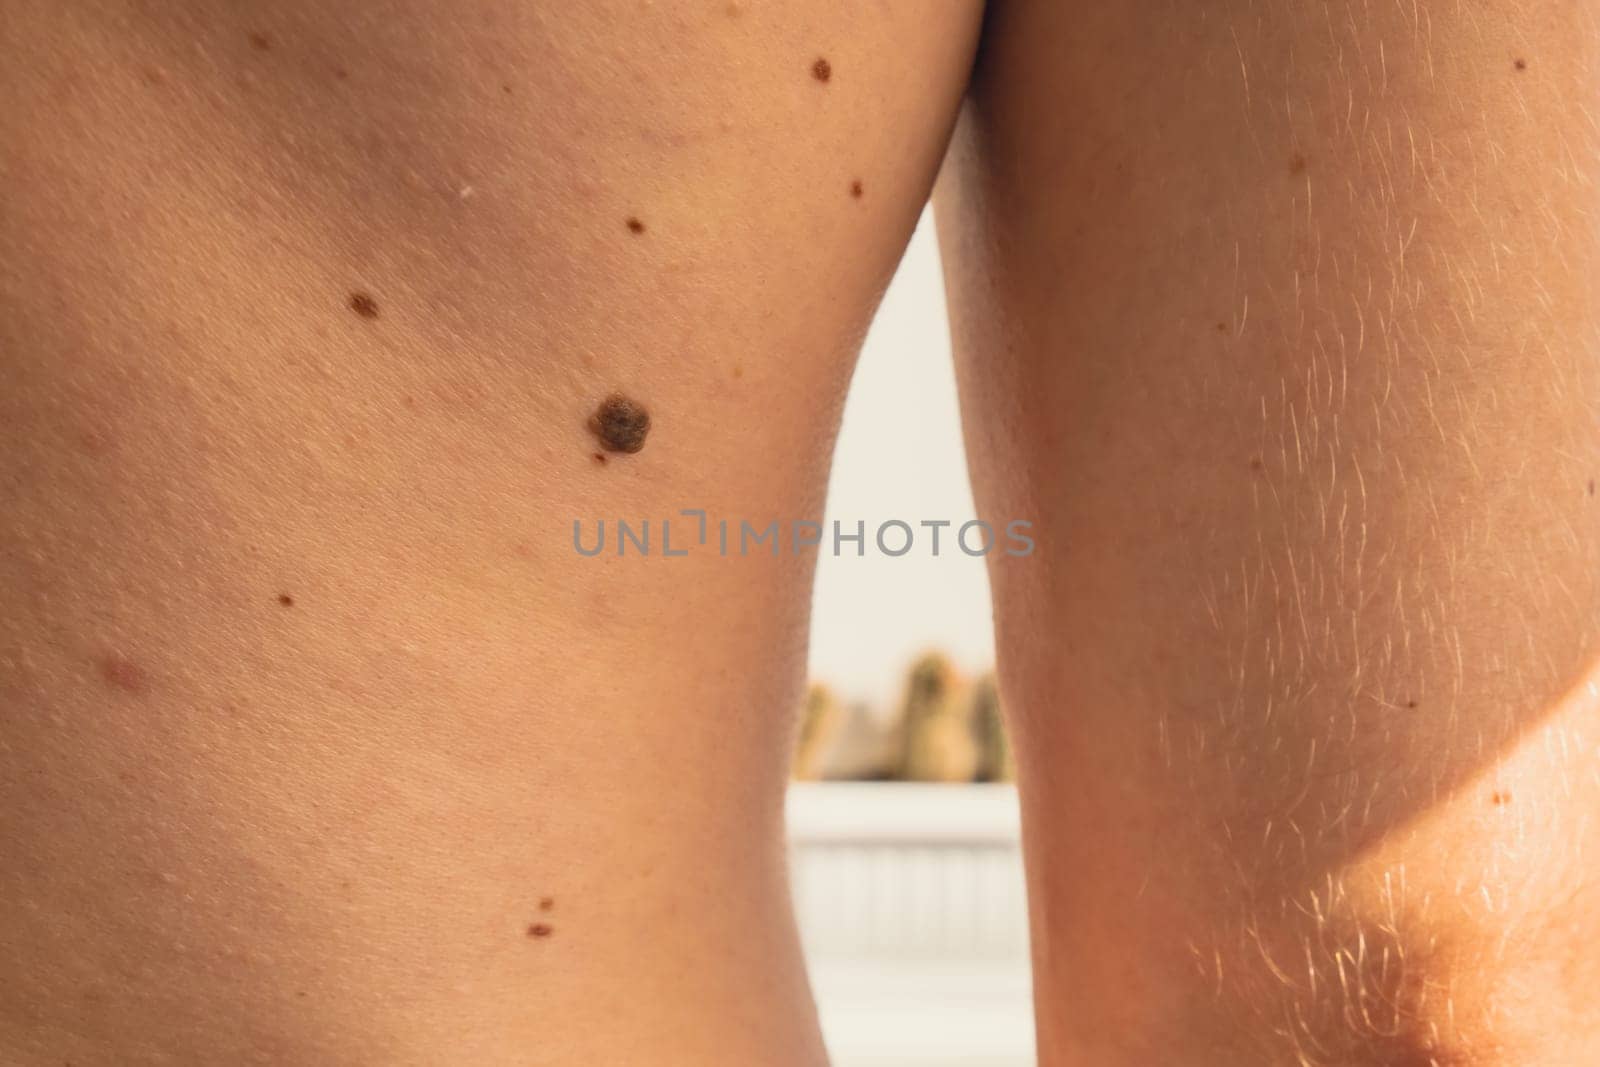 Male showing birthmarks on skin body back part. Close up detail of the bare skin. Health Effects of UV Radiation. Man with birthmarks Pigmentation and lot of birthmarks